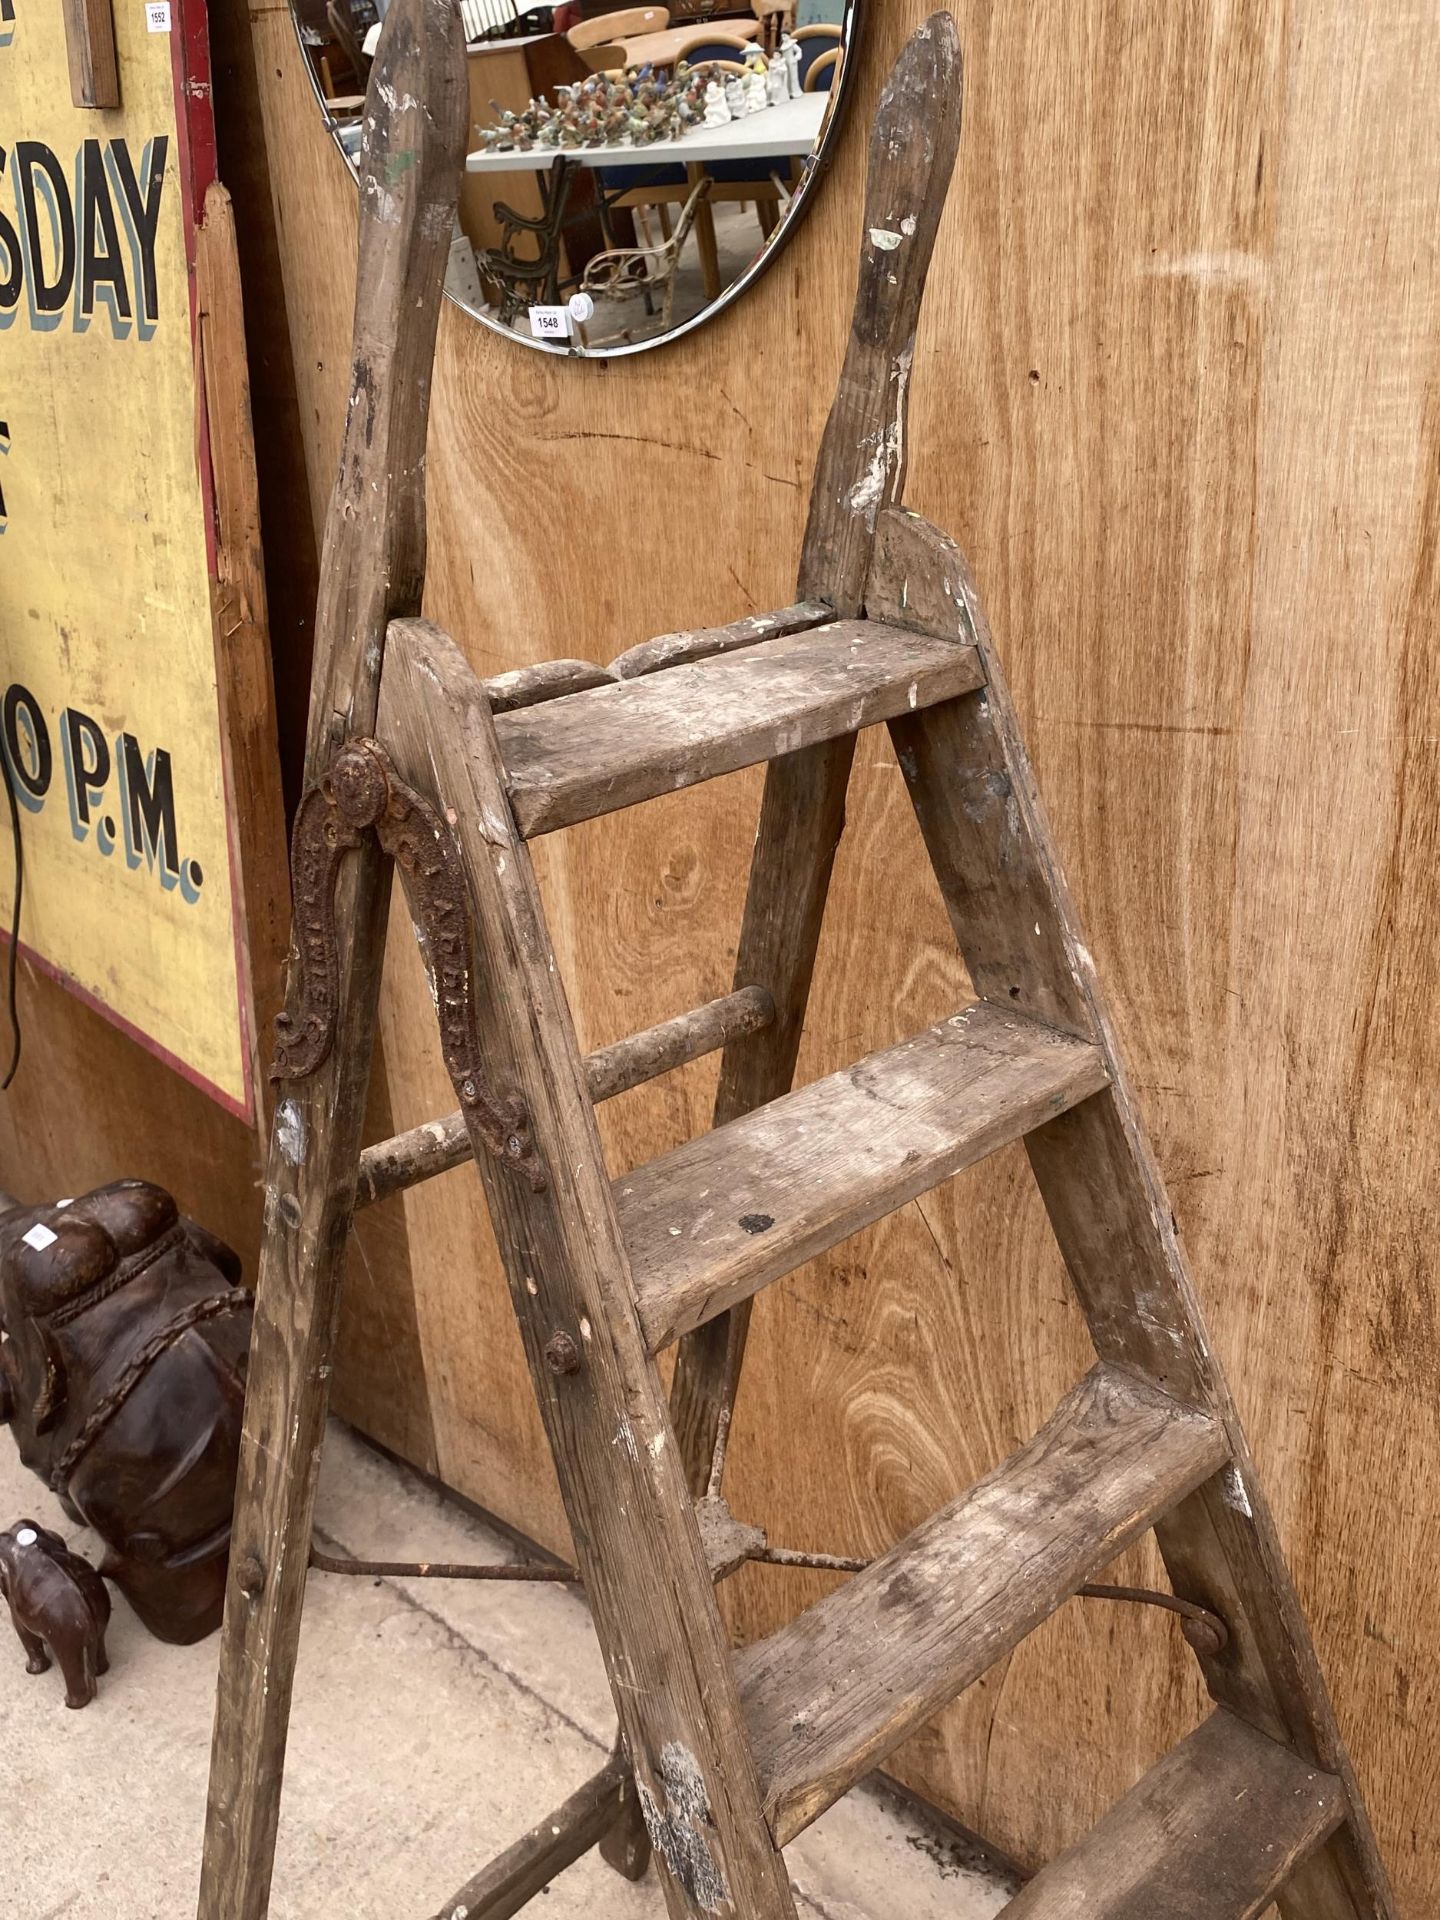 A VINTAGE FIVE RUNG WOODEN STEP LADDER WITH METAL HINGES BEARING THE NAME 'SIMPLEX' - Image 3 of 4